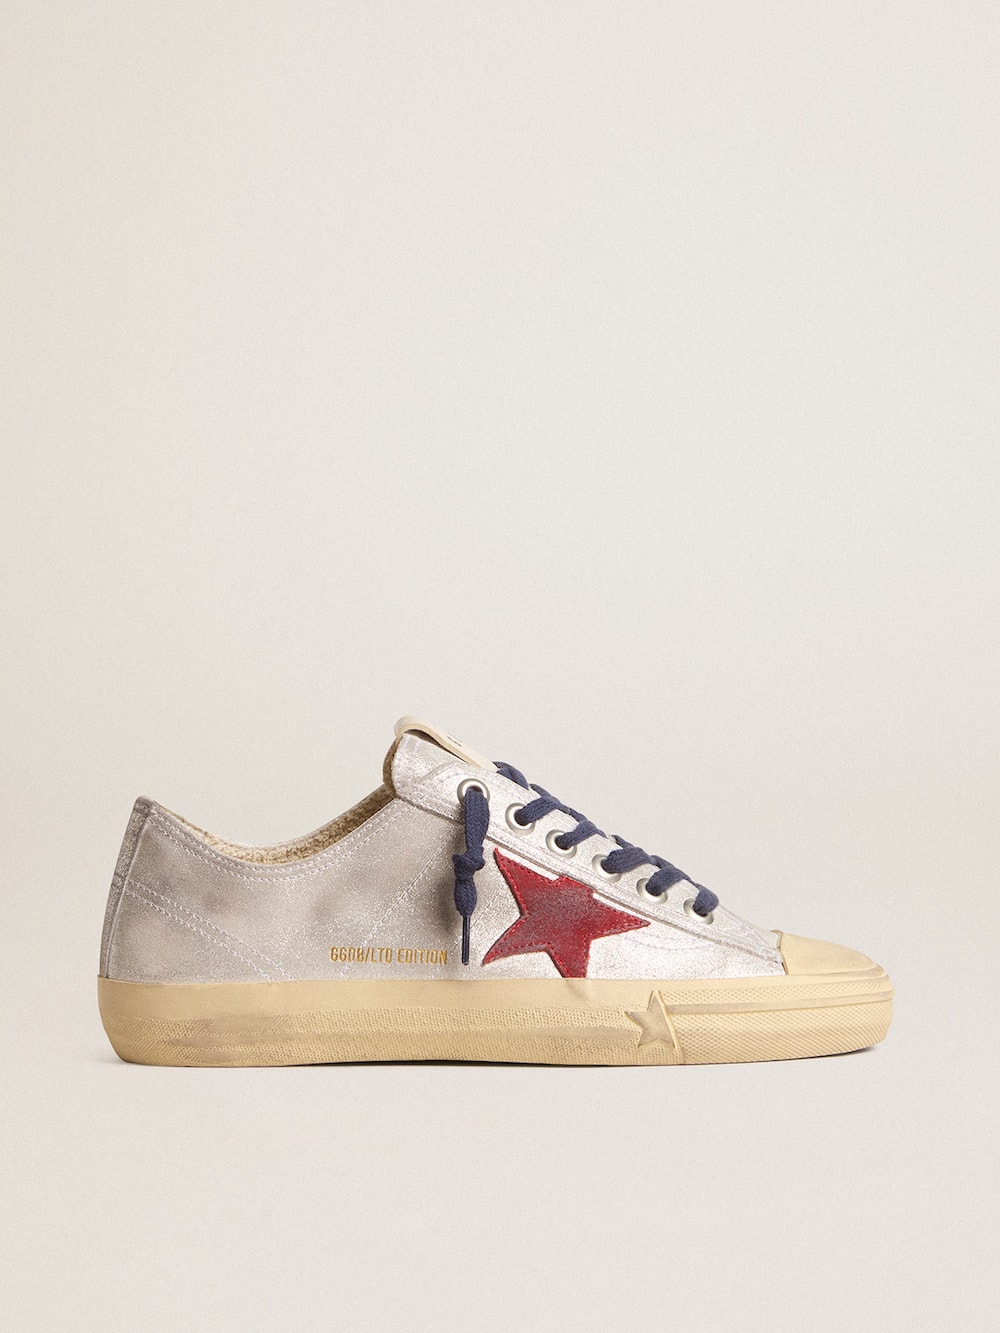 Golden Goose - Women's V-Star LTD in silver metallic suede with red suede star in 